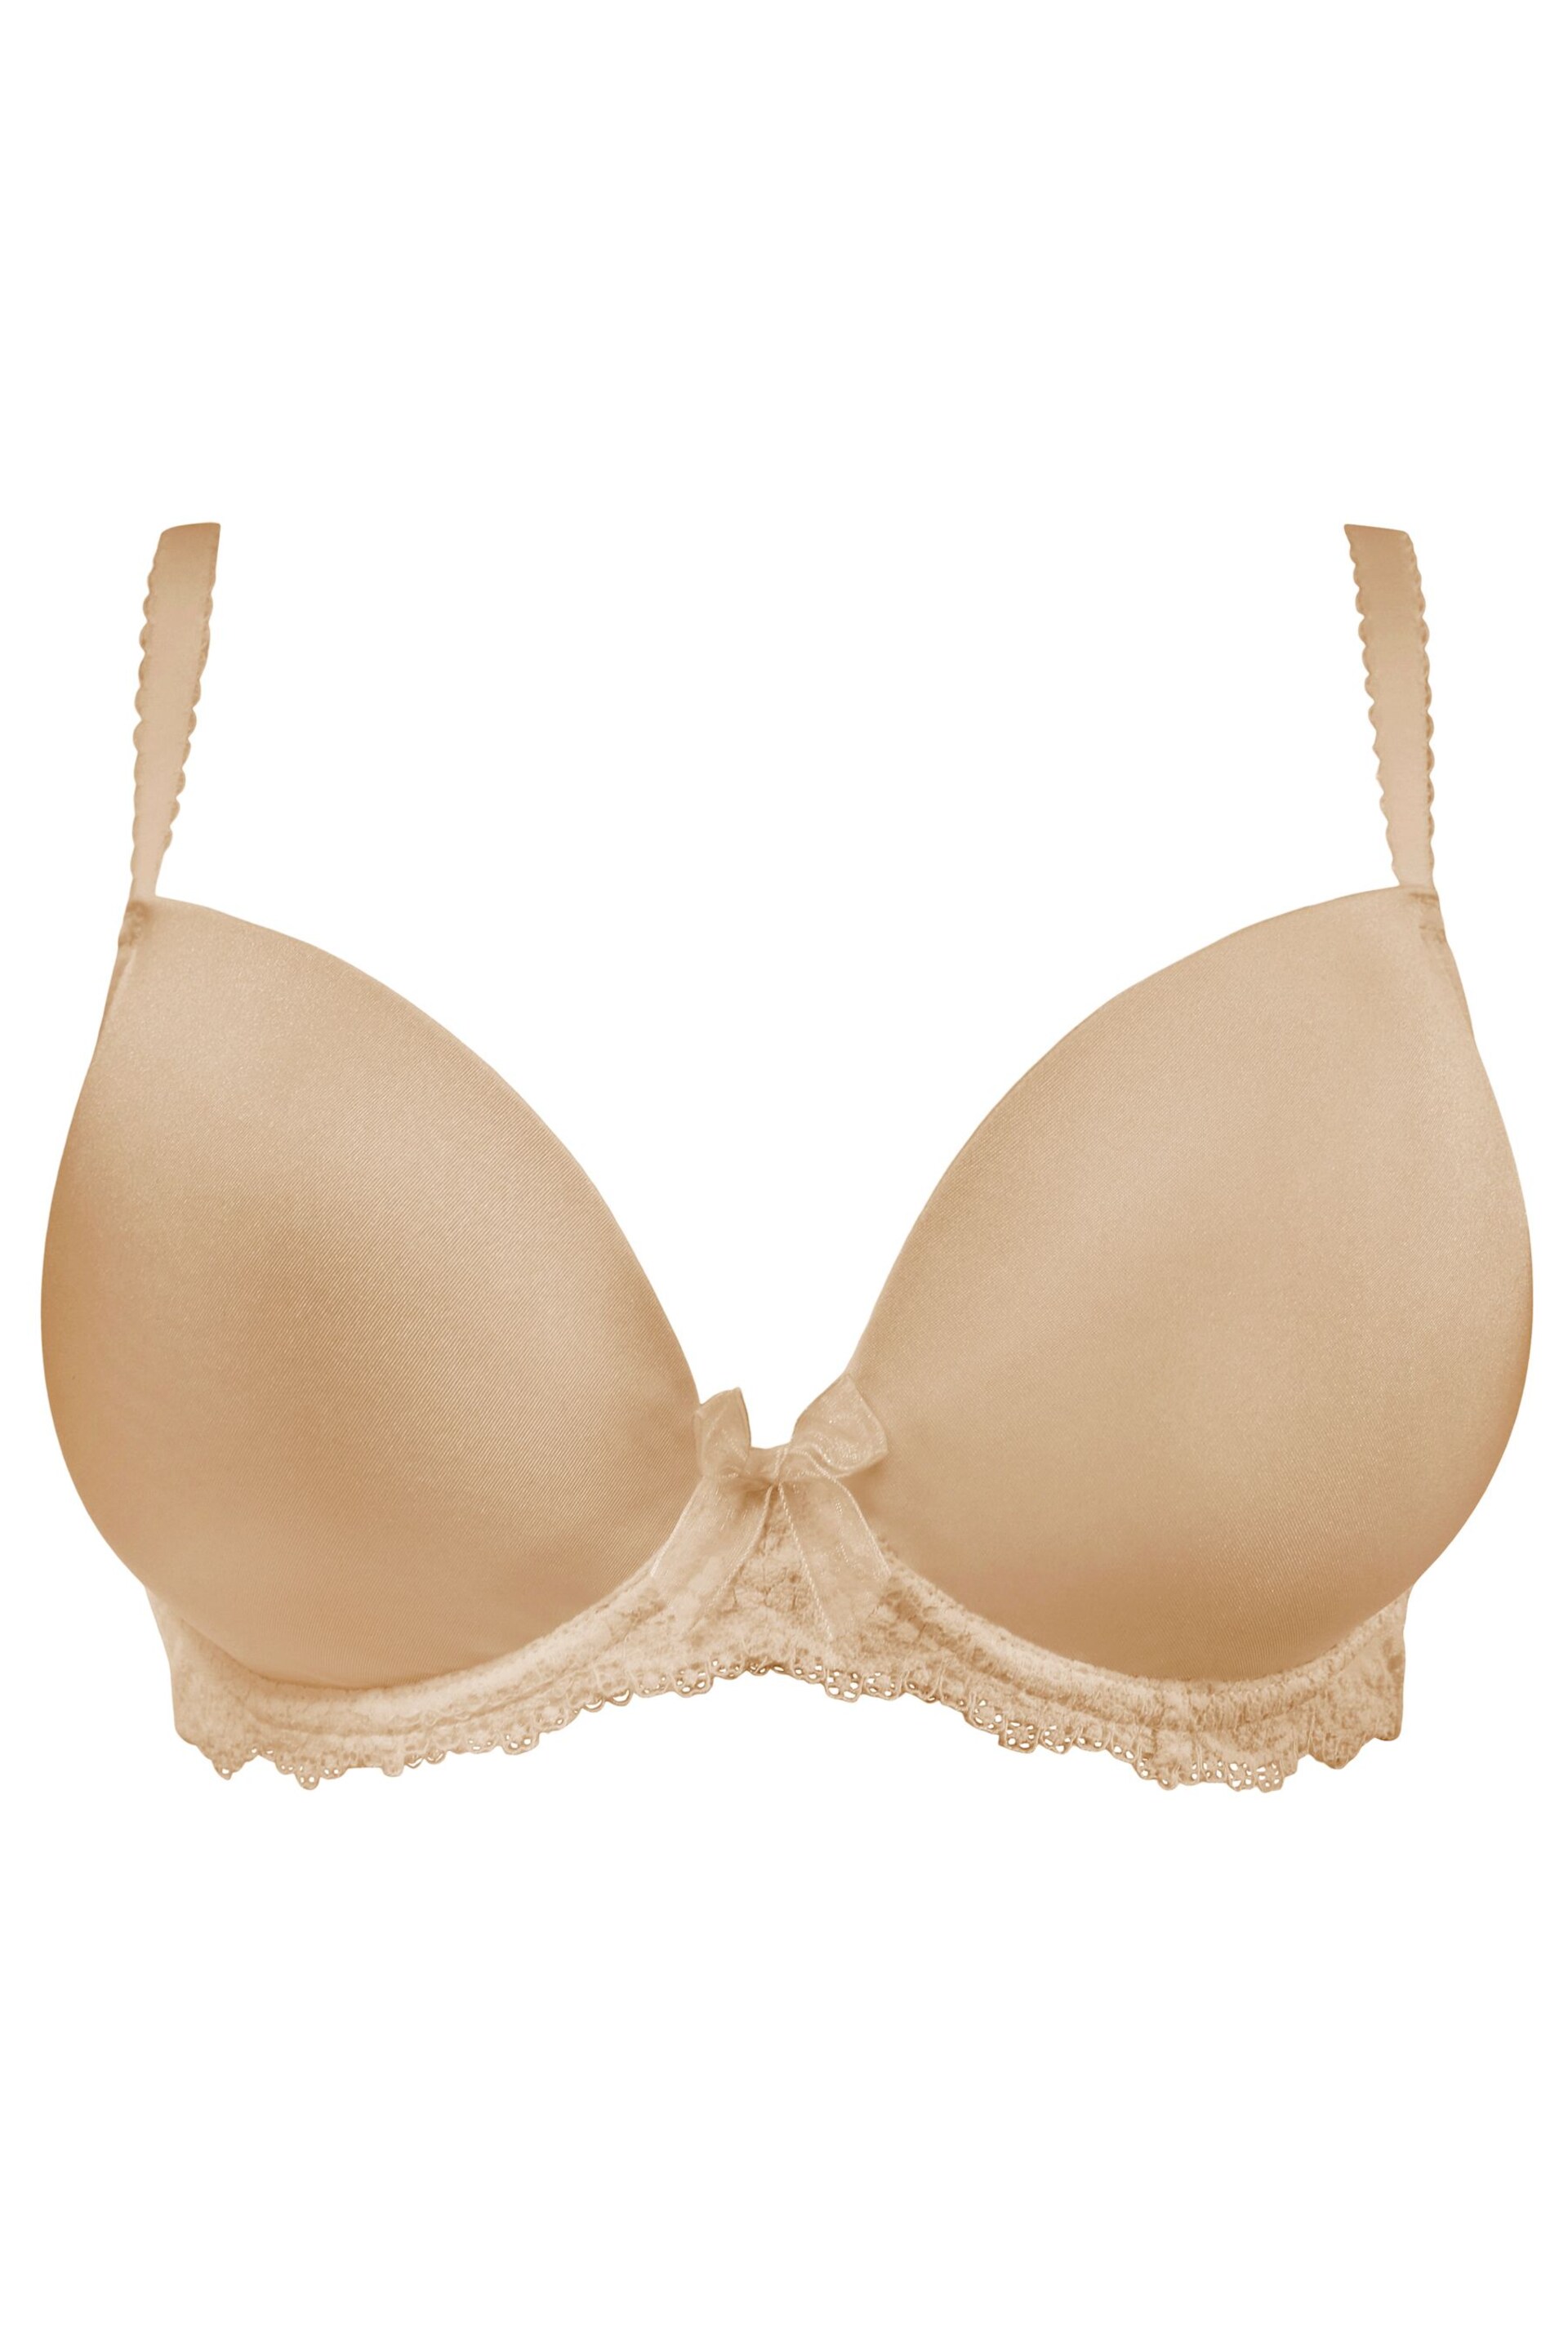 Pour Moi Natural Padded Flora Plunge Push Up T-Shirt Bra - Image 4 of 5